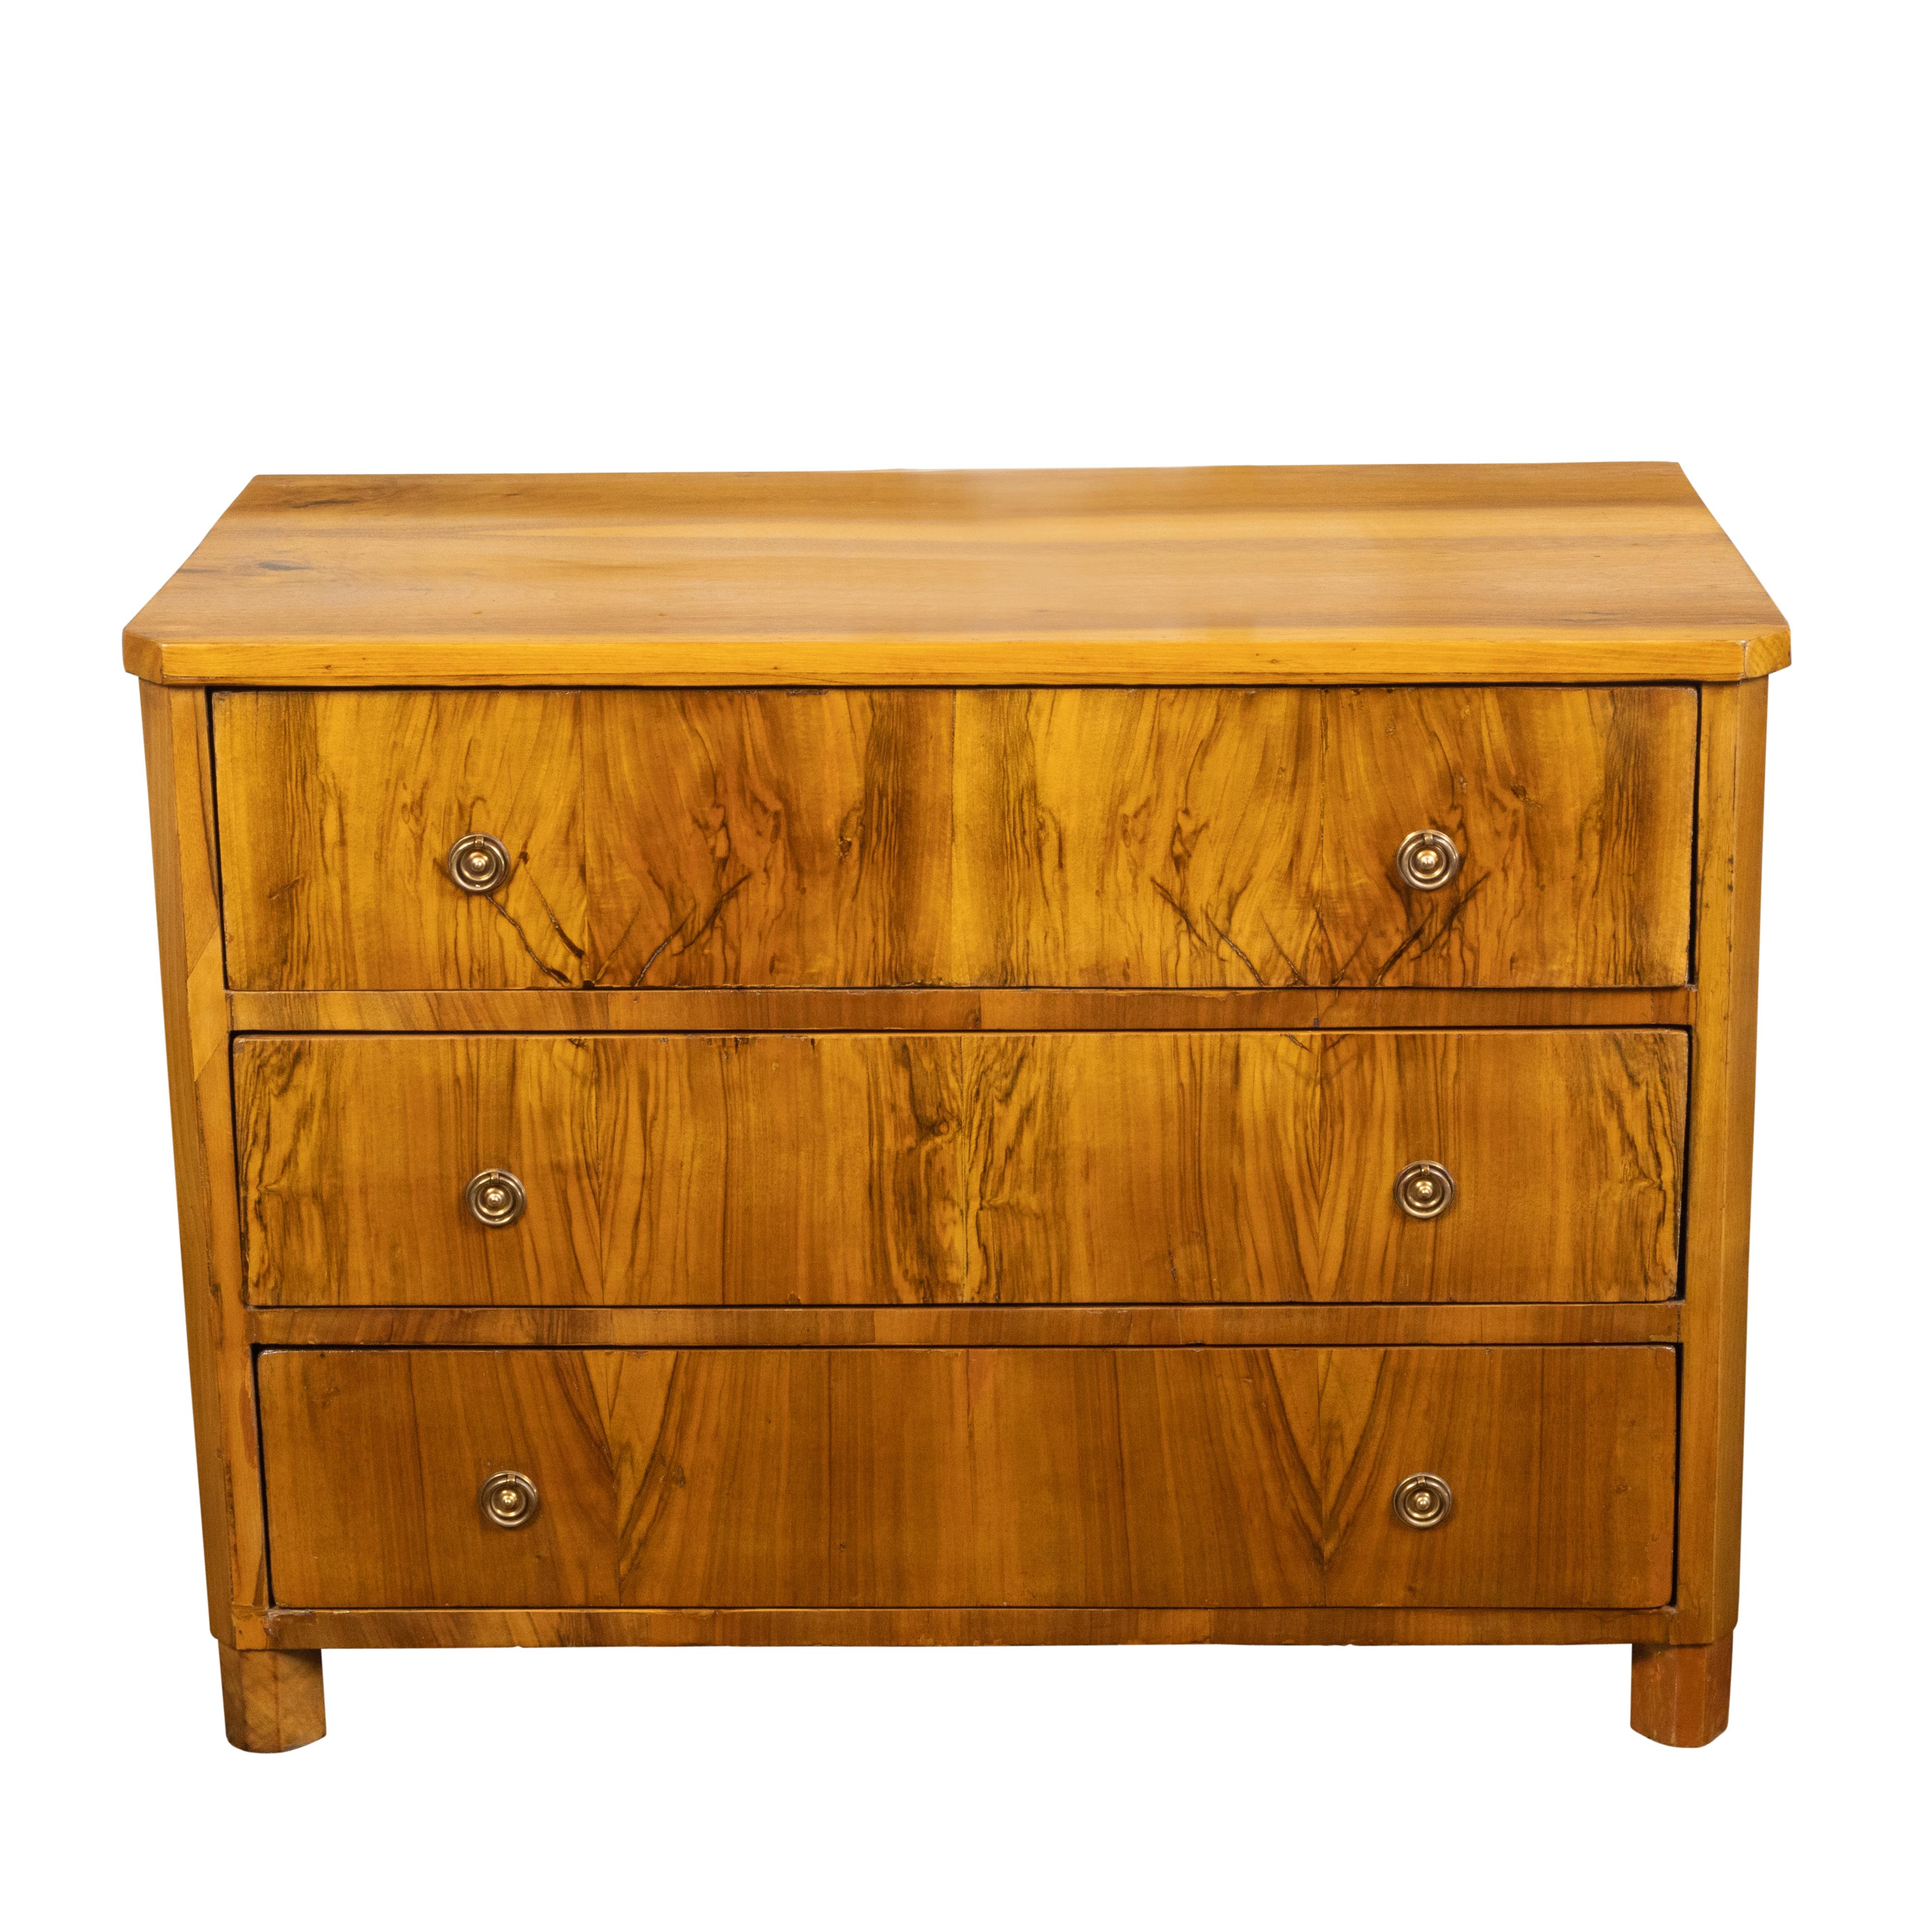 Austrian 19th Century Biedermeier Commode with Three Butterfly Veneered Drawers In Good Condition For Sale In Atlanta, GA